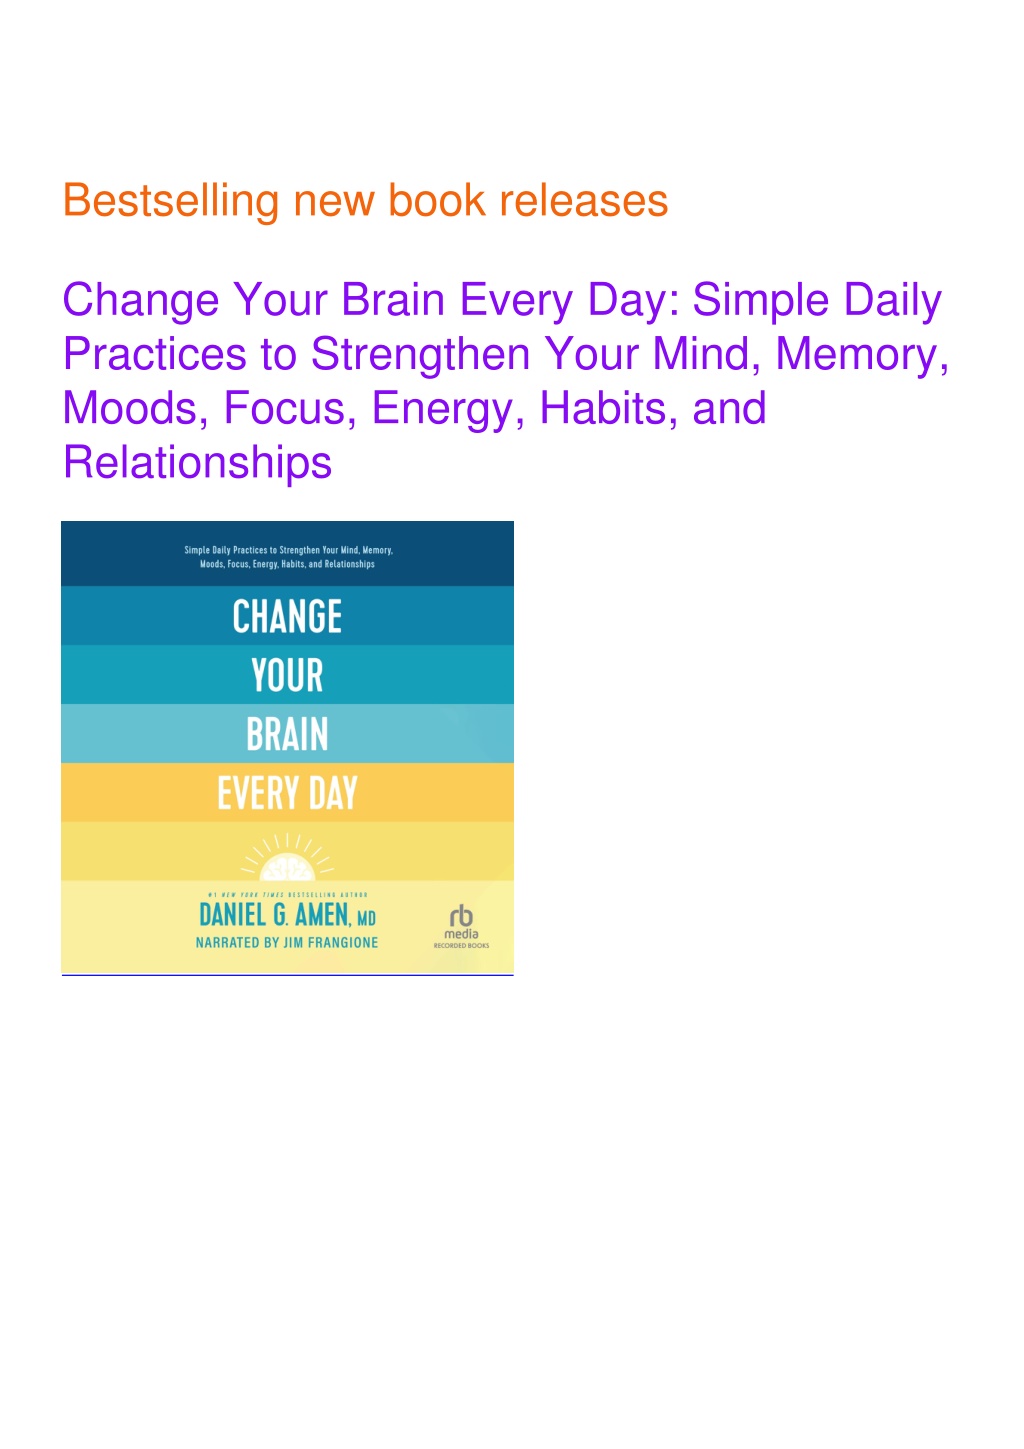 Change Your Brain Every Day: Simple Daily Practices to Strengthen Your  Mind, Memory, Moods, Focus, Energy, Habits, and Relationships